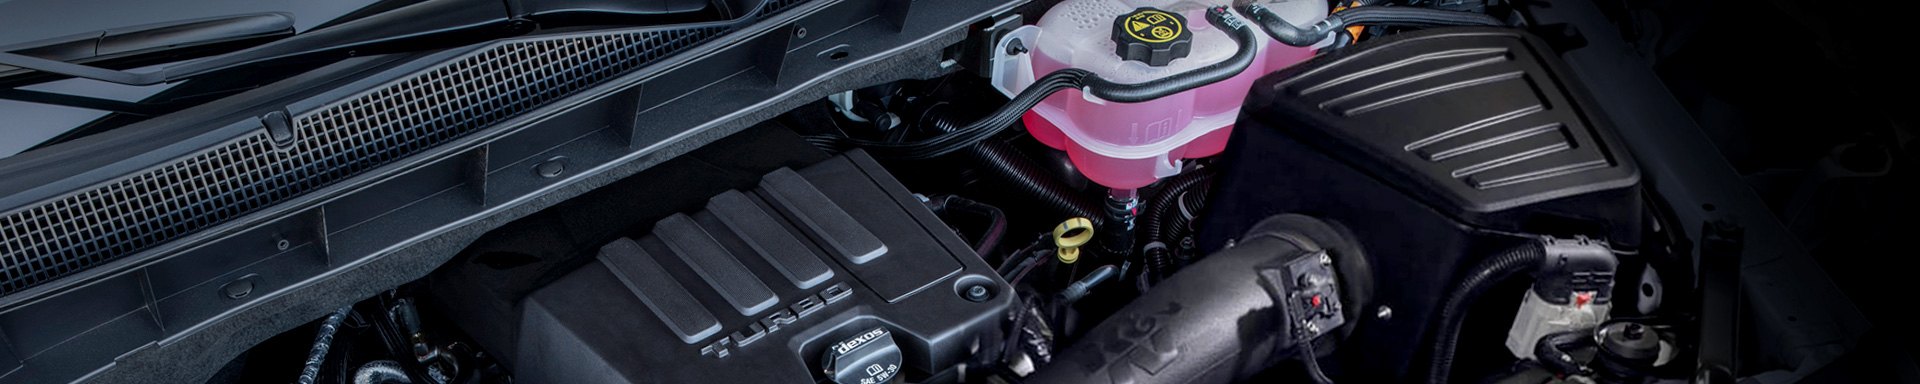 New K&N Performance Intake For Chevy Silverado With 2.7L Engine